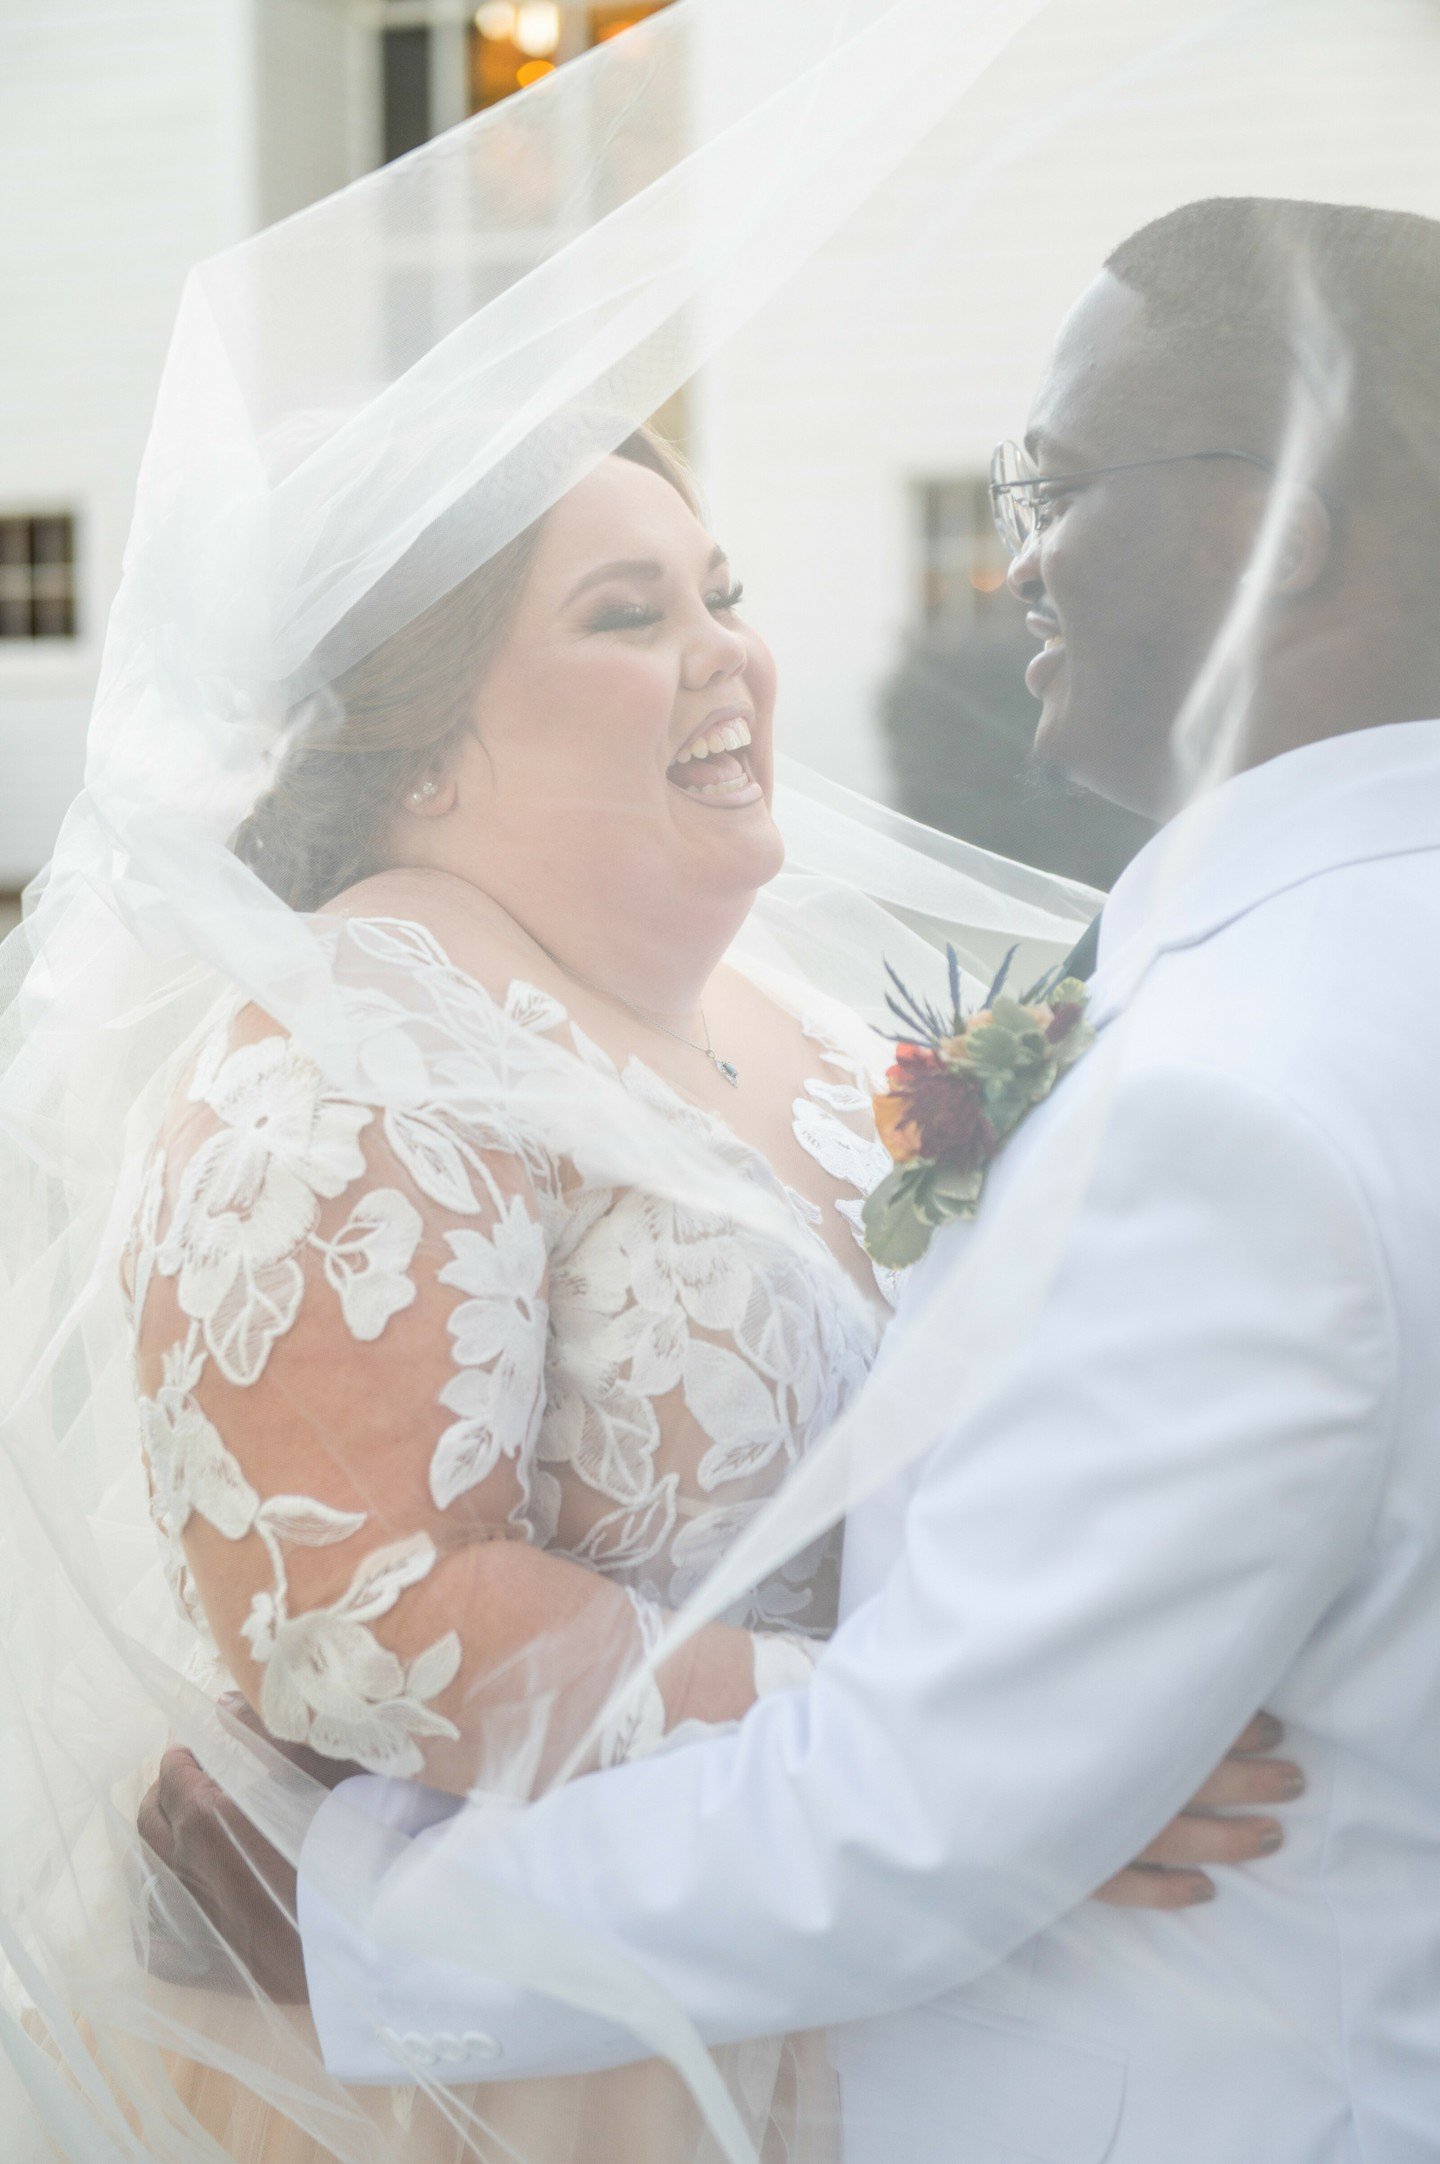 Reliving this beautiful couple's happy day on the blog today...Happy 6-month anniversary, Catie &amp; Kishon!
*
*
*
Venue: The Dairy Barn at @ascgreenway
Photographer: @kimberly.cauble
2nd Shooter: @blakelyclayton @blakelynclaytonphoto
Officiant: @ro